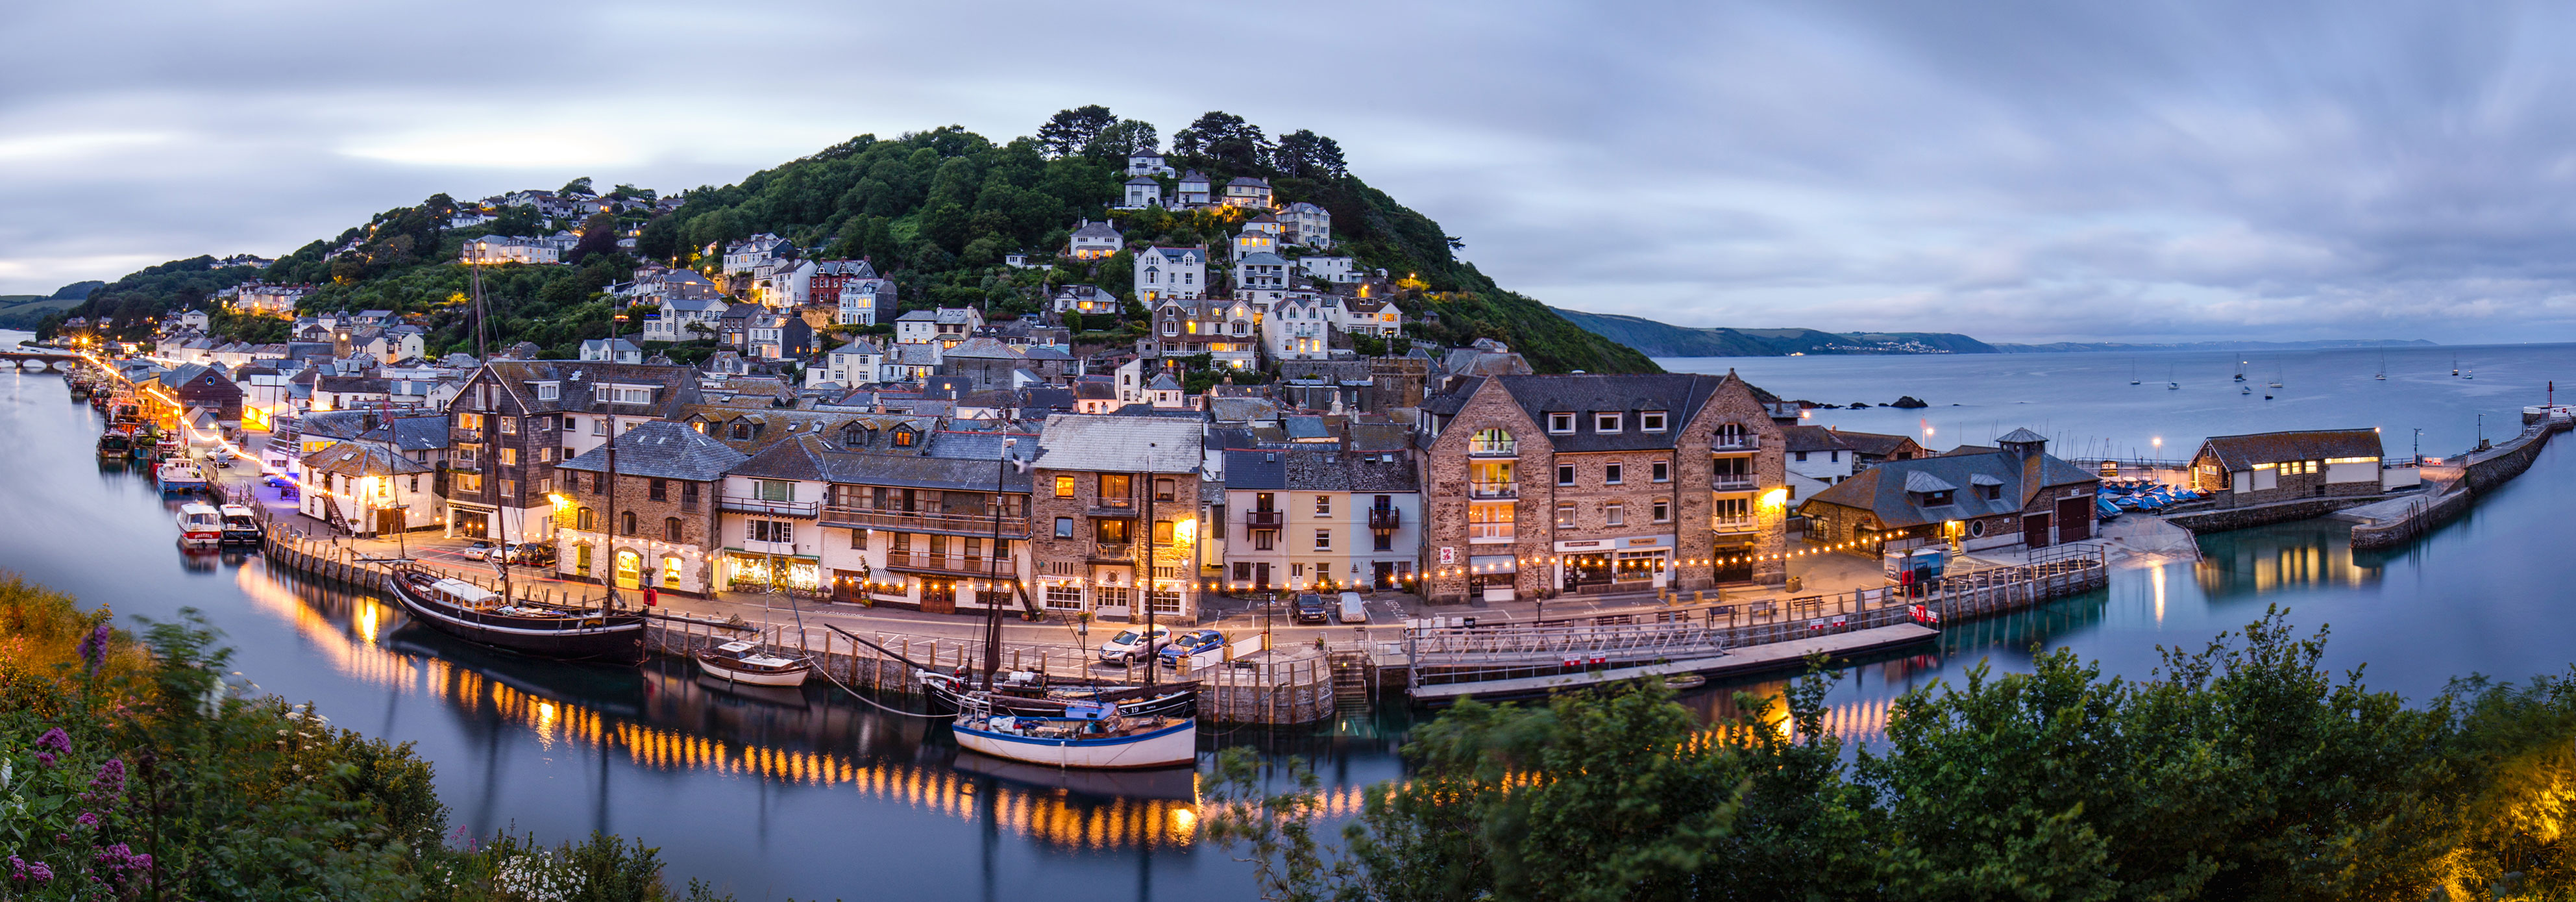 Restaurants  and Pubs of Looe